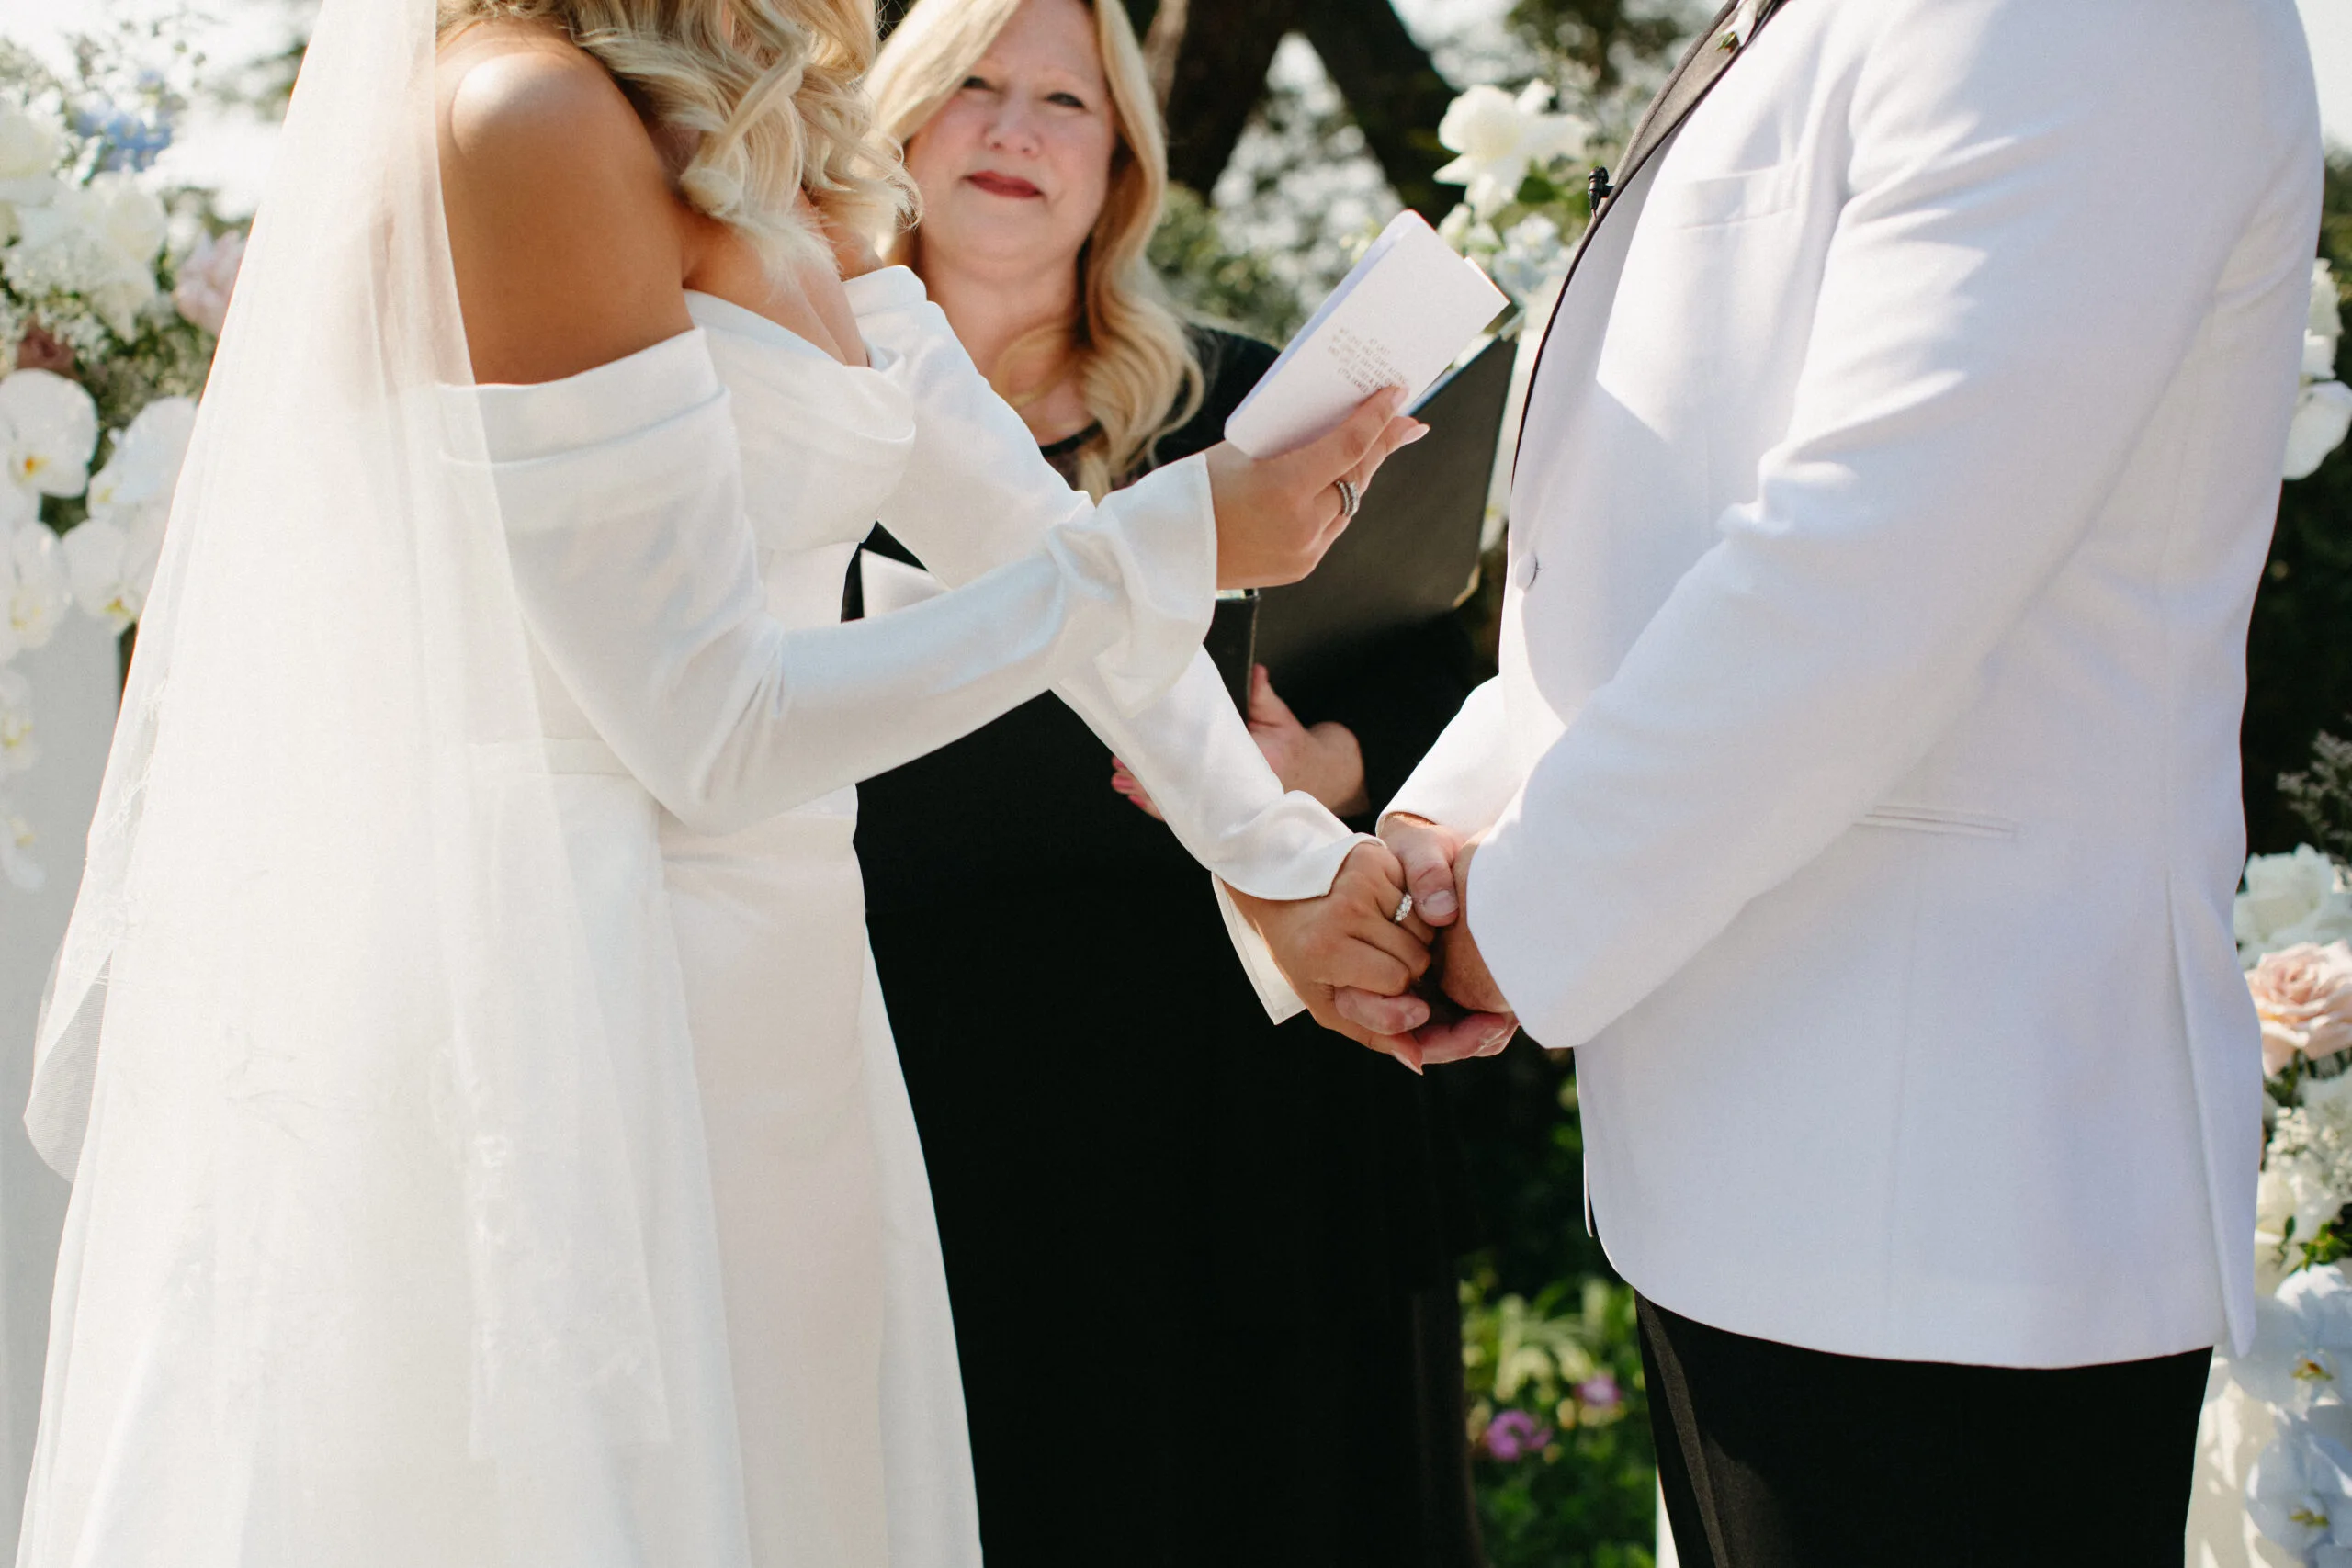 Brittany & Graeme reading their vows during a ceremony with Officiant Melinda